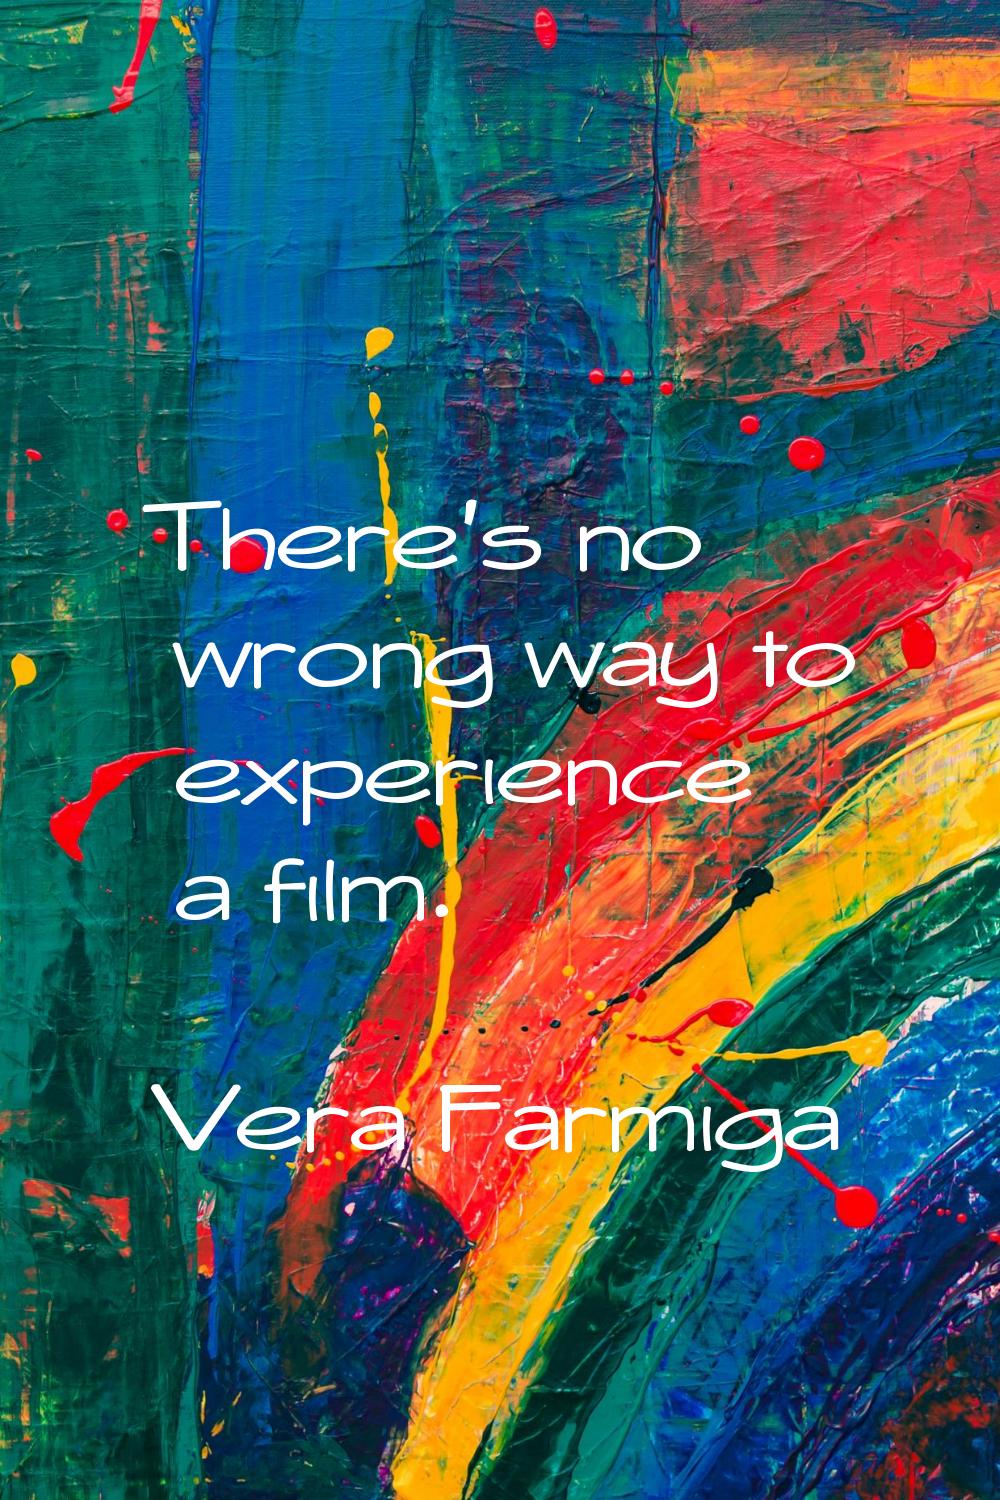 There's no wrong way to experience a film.